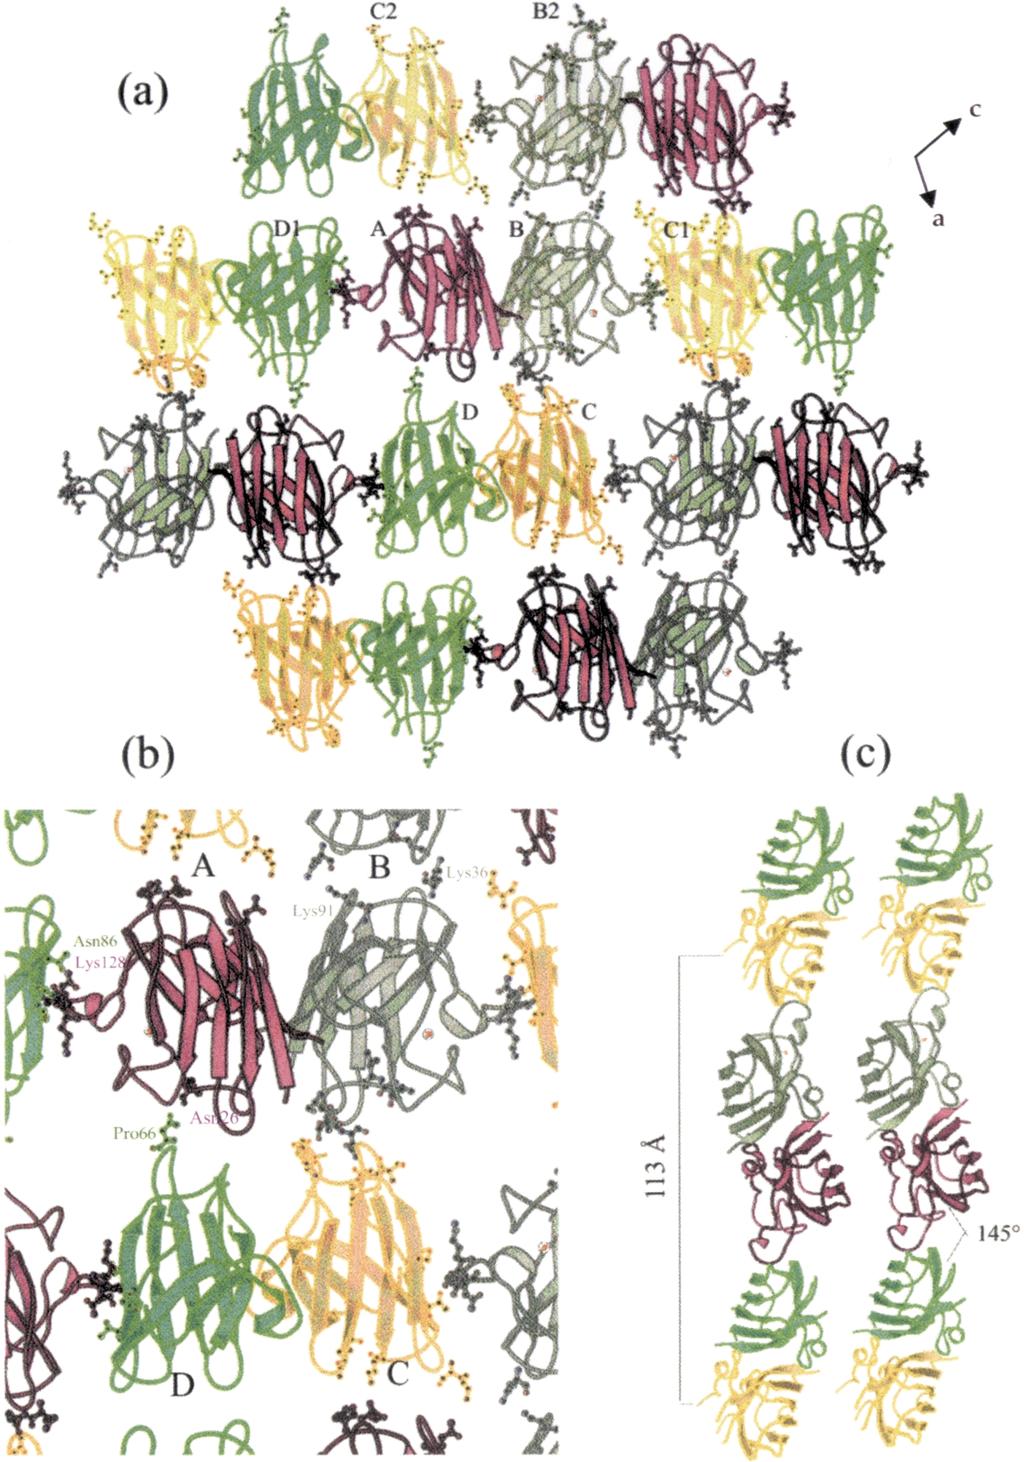 886 Cu, Zn Superoxide Dismutase Figure 7. Packing of molecules in apo wtsod1.